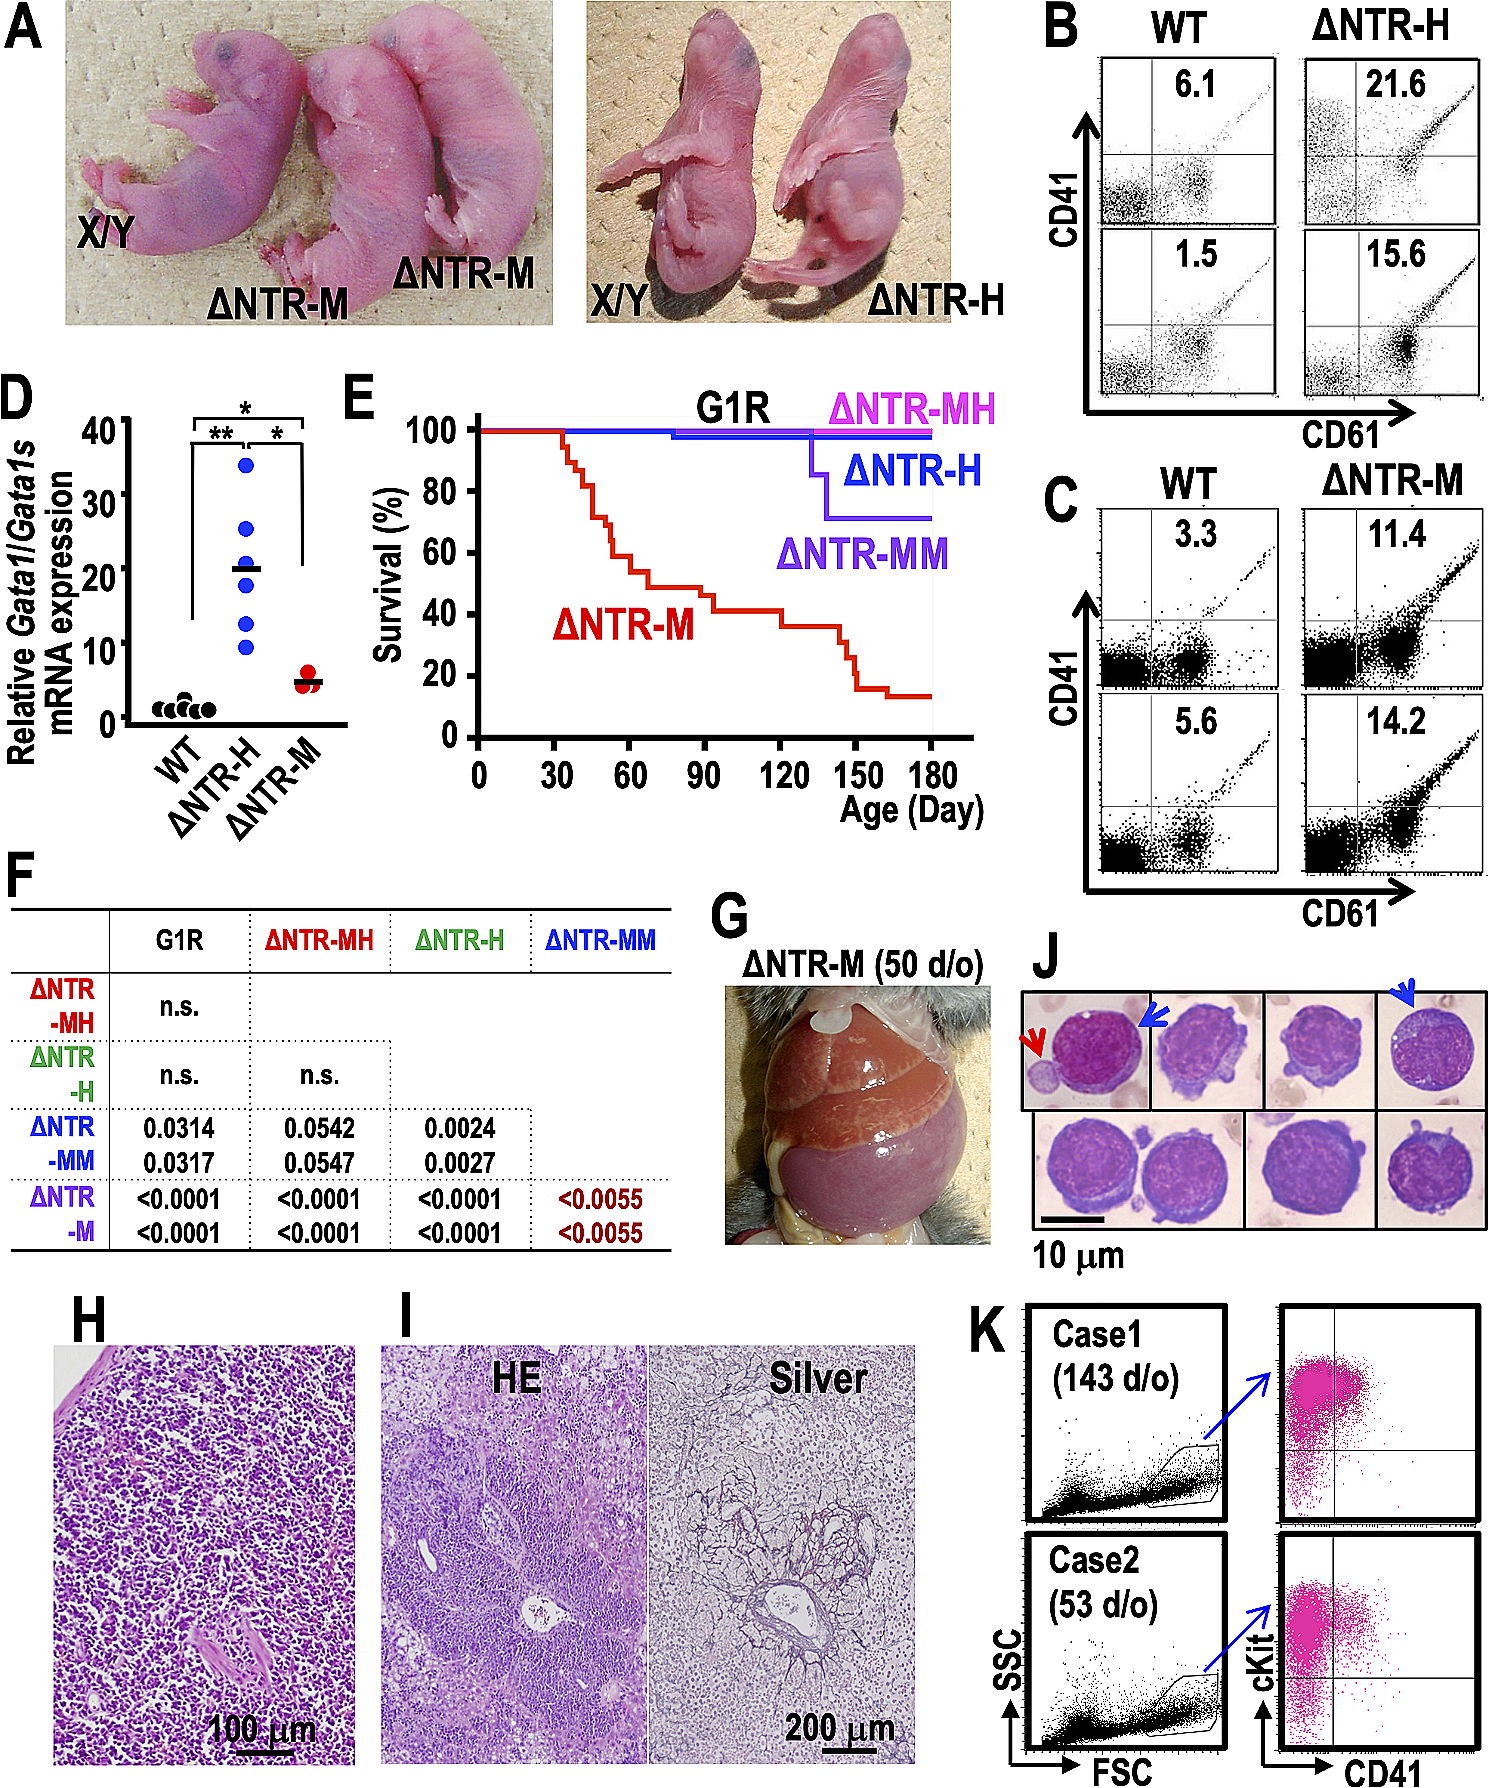 The abundance of the short GATA1 isoform affects megakaryocyte differentiation and leukemic predisposition in mice